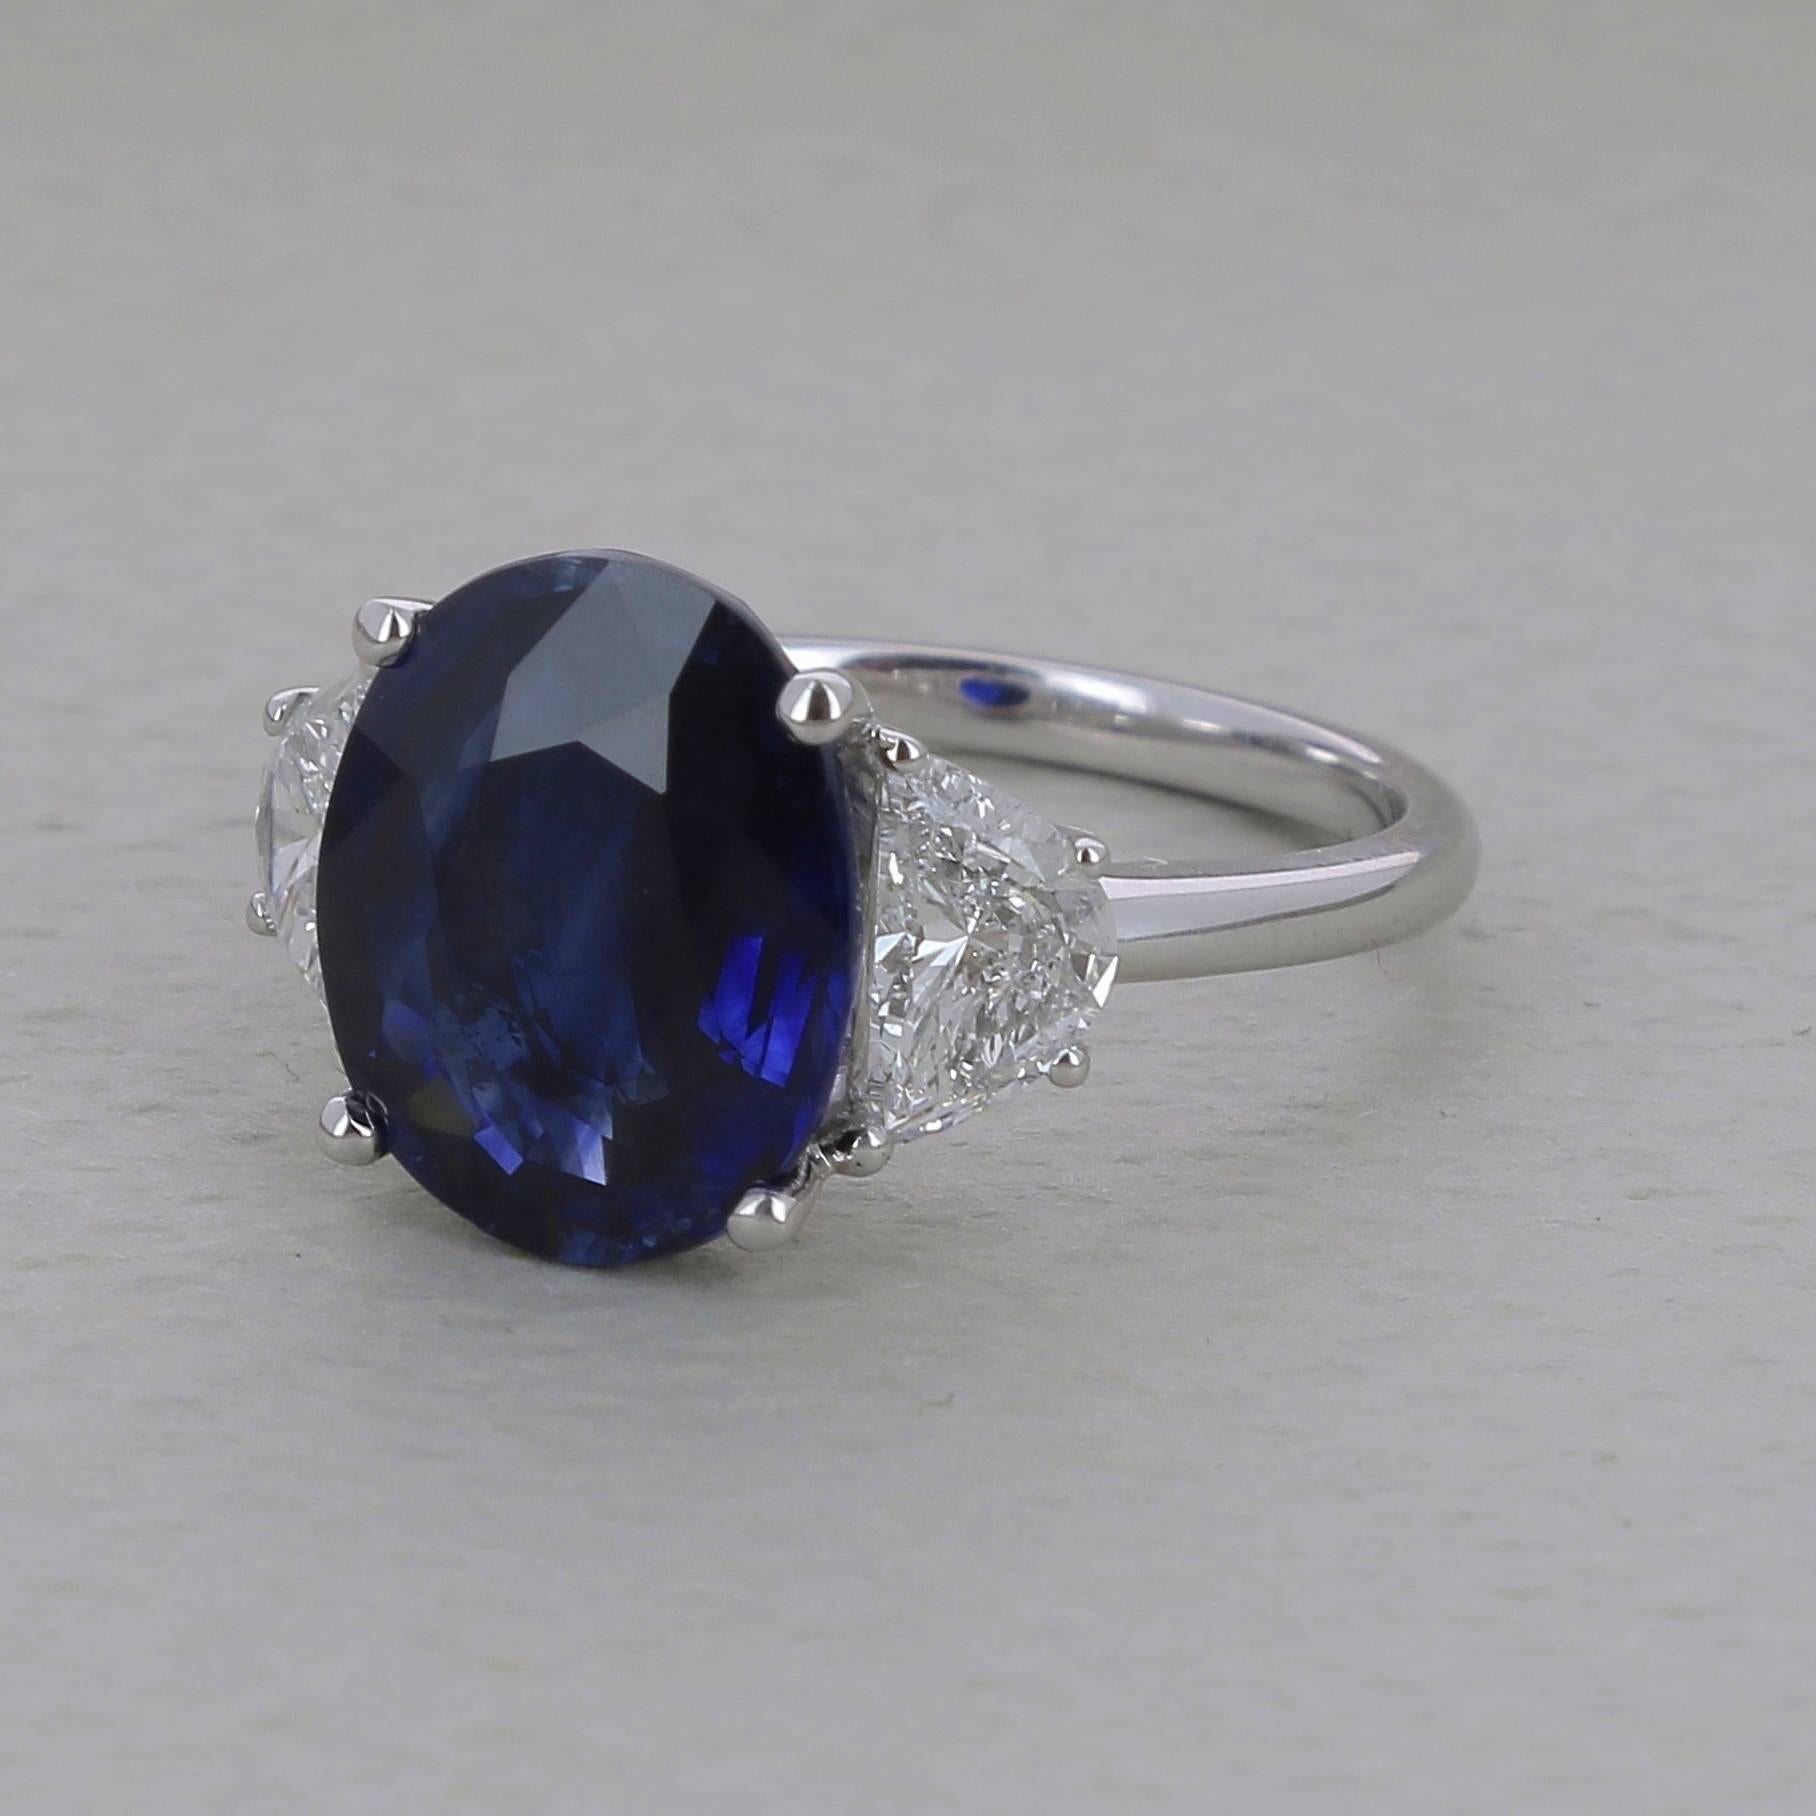 A Deep blue Sapphire Ring weighing 6.19 carats. The stone’s shape is oval, having for colors a striking deep blue. 
The ring is set with two Half Moon Diamond weighing 1.23 carats. 
The Sapphire is accompanied by a GRS certificate (Number